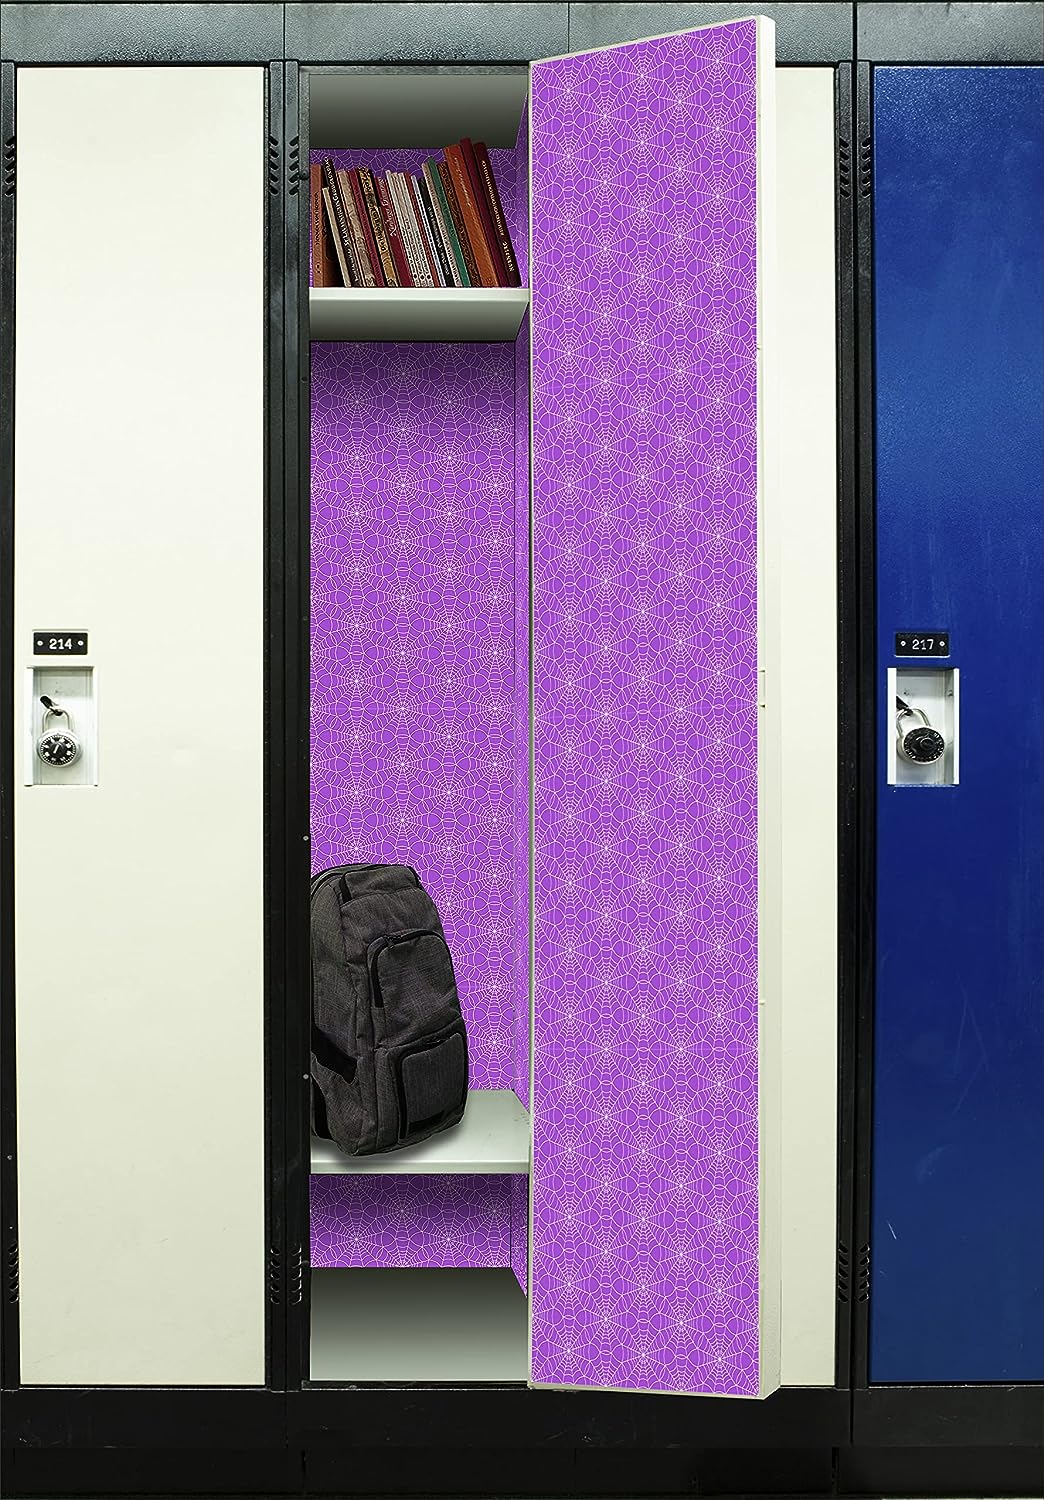 PELICAN INDUSTRIAL Deluxe School Locker Magnetic Wallpaper (Full Sheet Magnetic) - Full Cover Standard Half Lockers - Trimmable, Easy Install, Remove & Reuse - Pack of 12 Sheets - (Violet vr60)